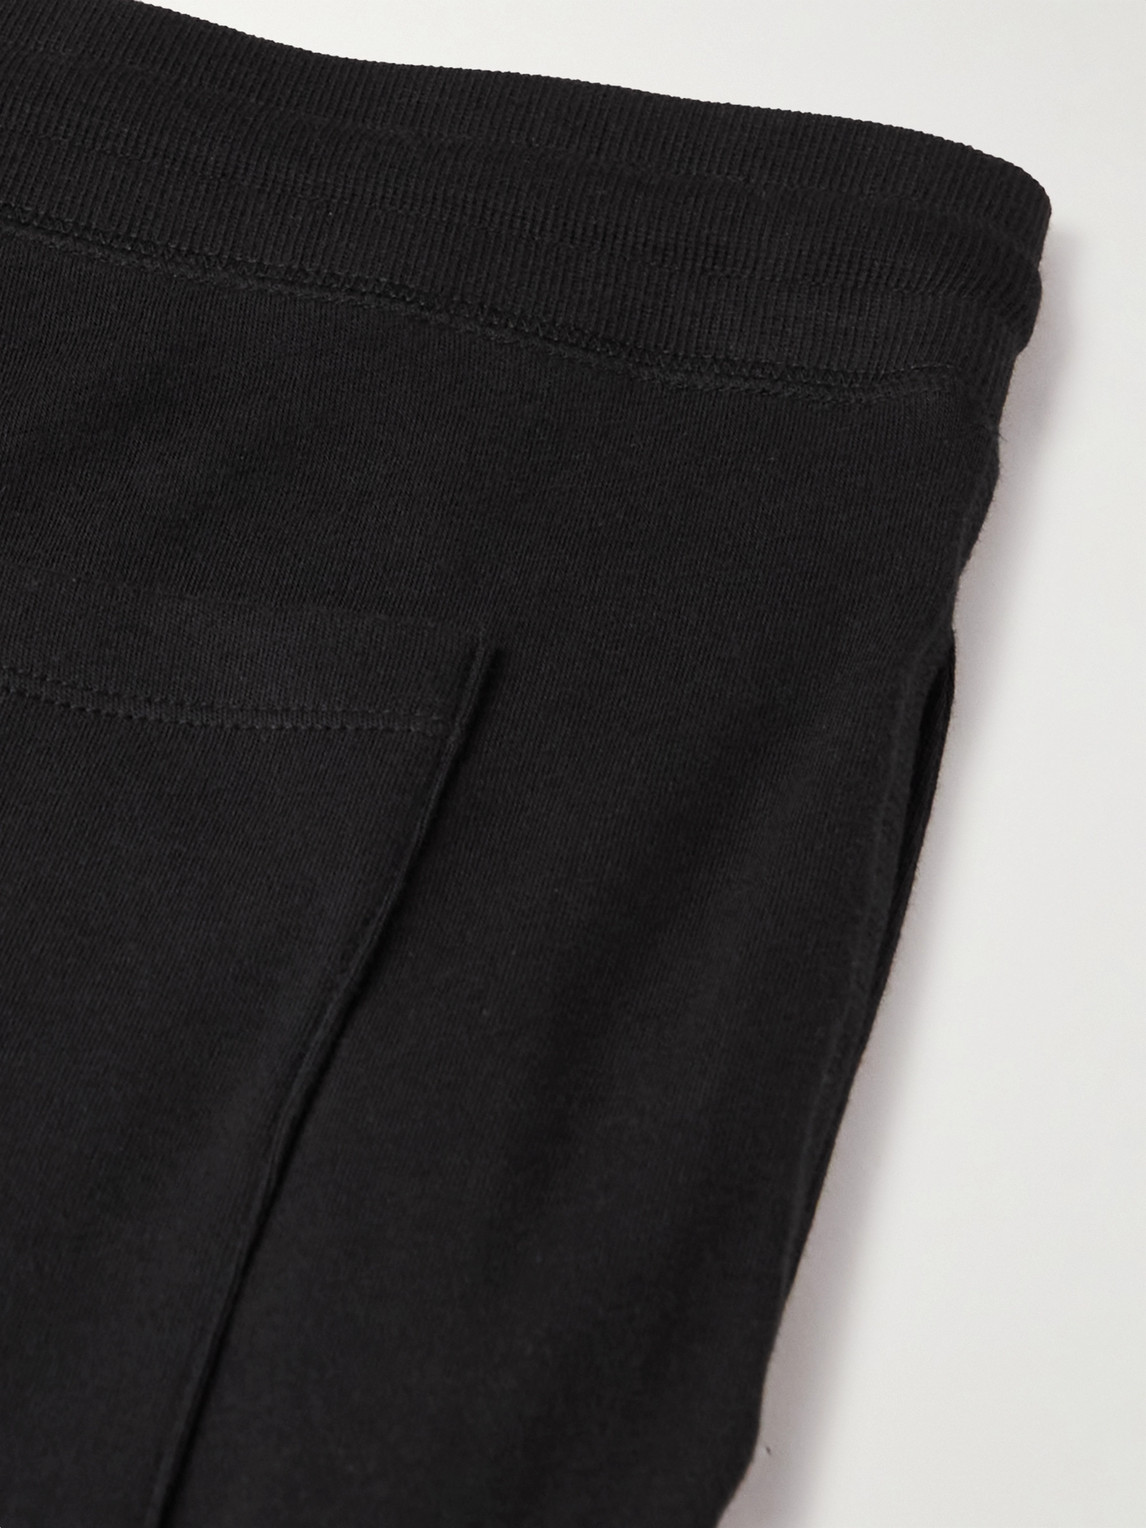 PAUL SMITH TAPERED COTTON AND MODAL-BLEND JERSEY PYJAMA TROUSERS 